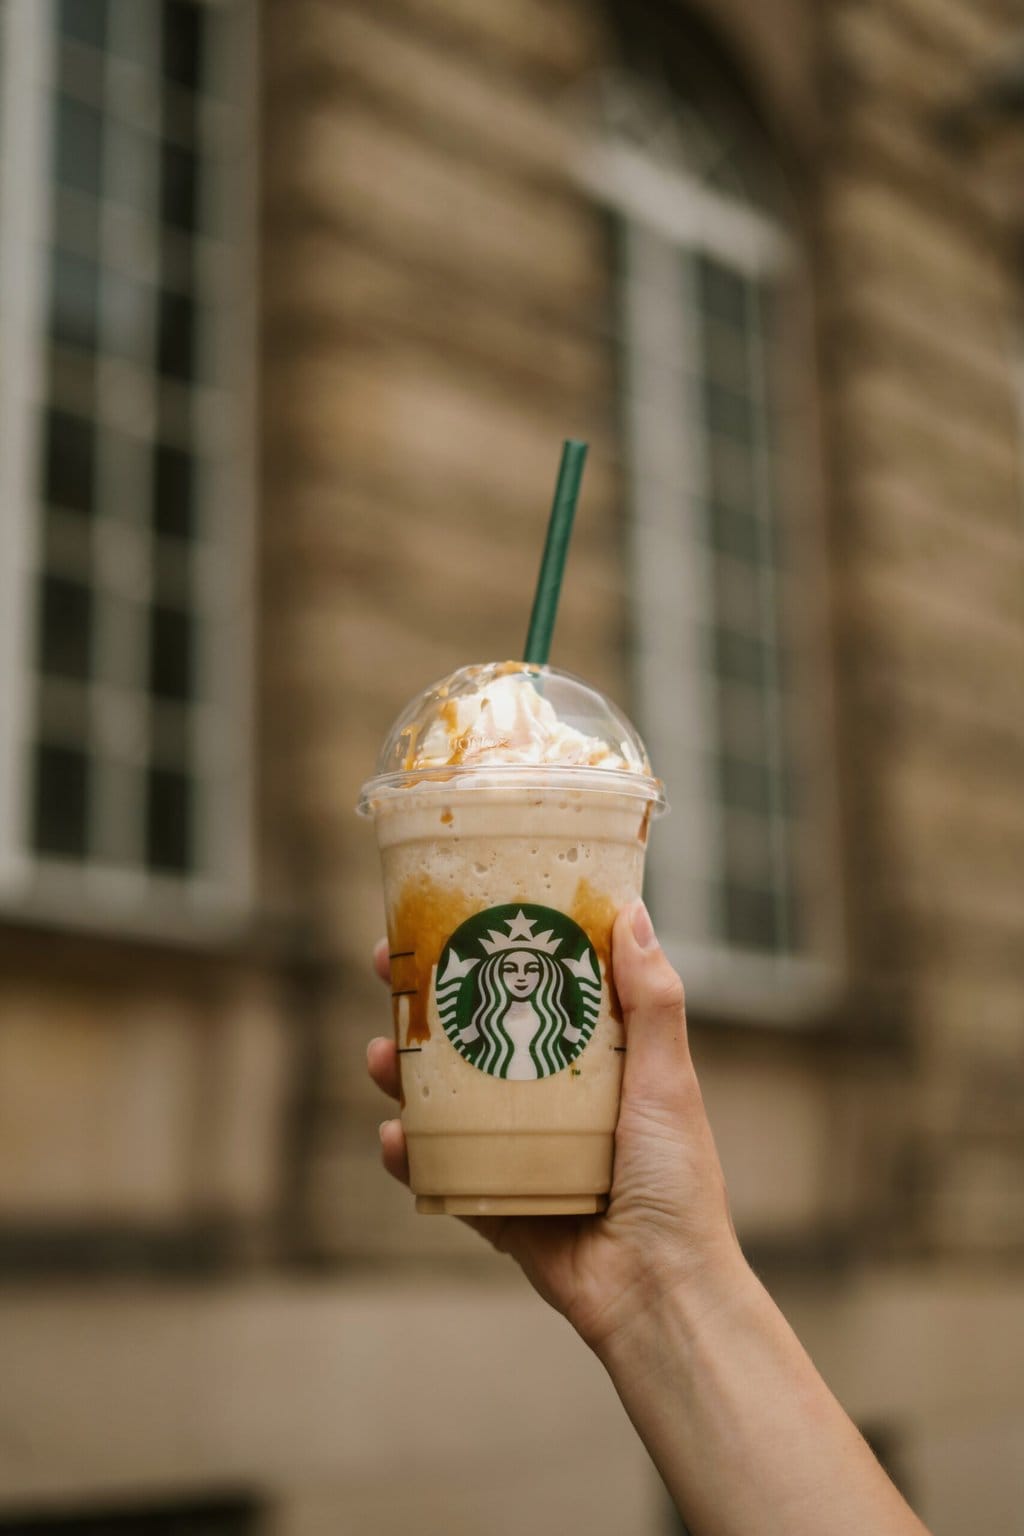 Person Holding Starbucks Cup with Frappuccino drink